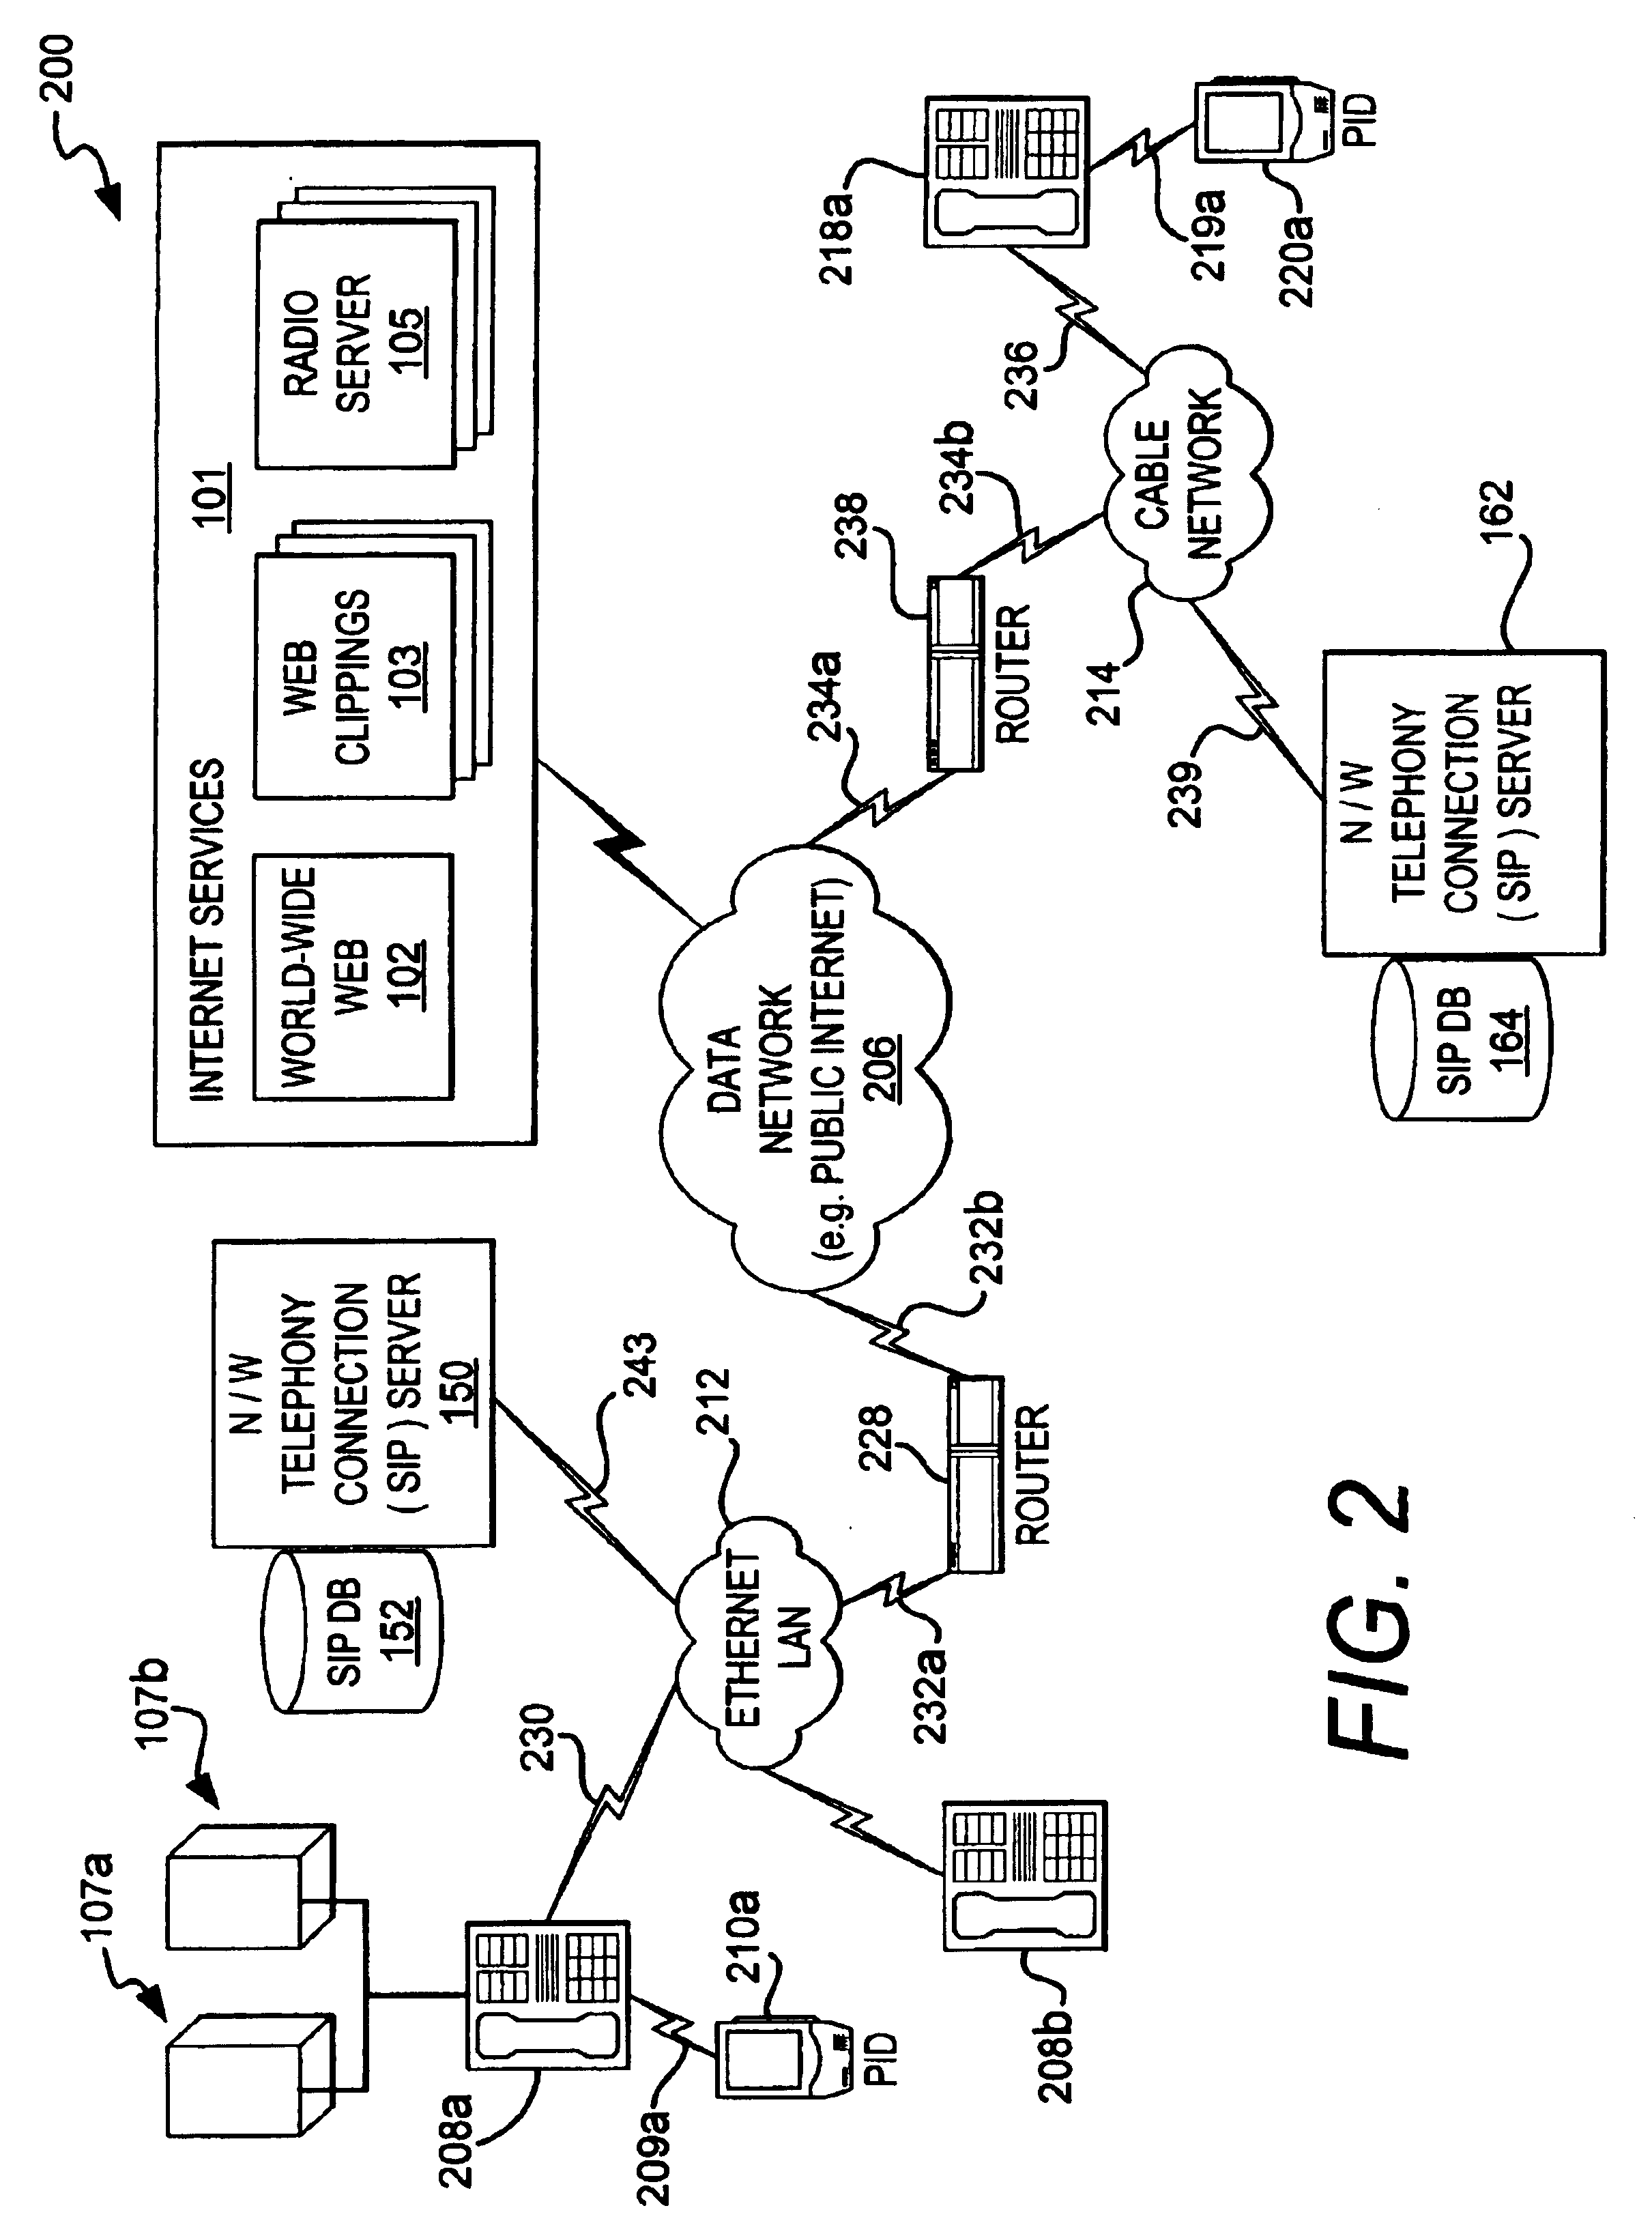 System and method for accessing radio programs using a data network telephone in a network based telecommunication system